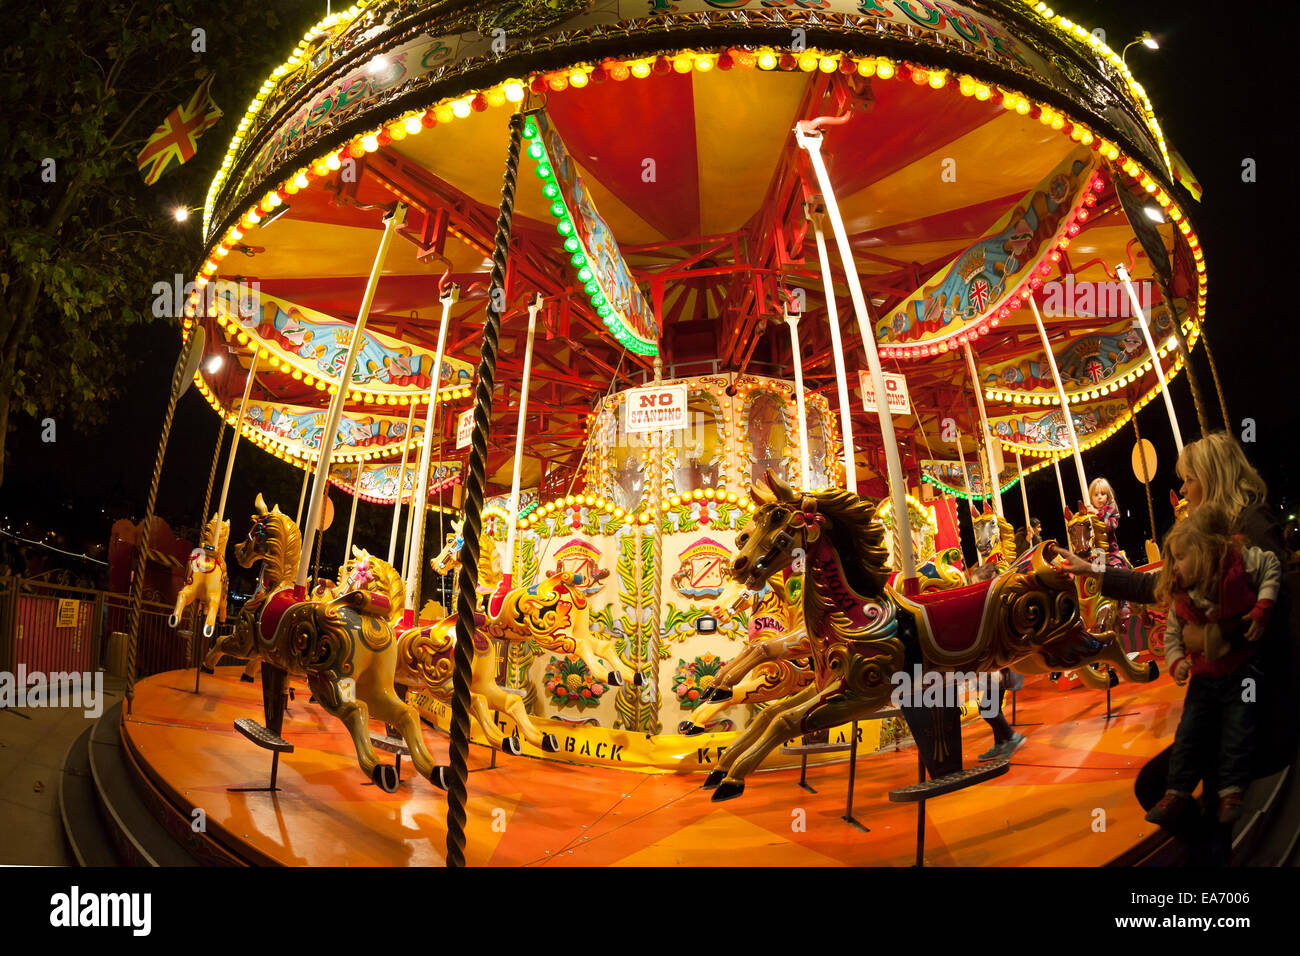 Merry-go-round on the riverside promenade after dark, South Bank, London Stock Photo